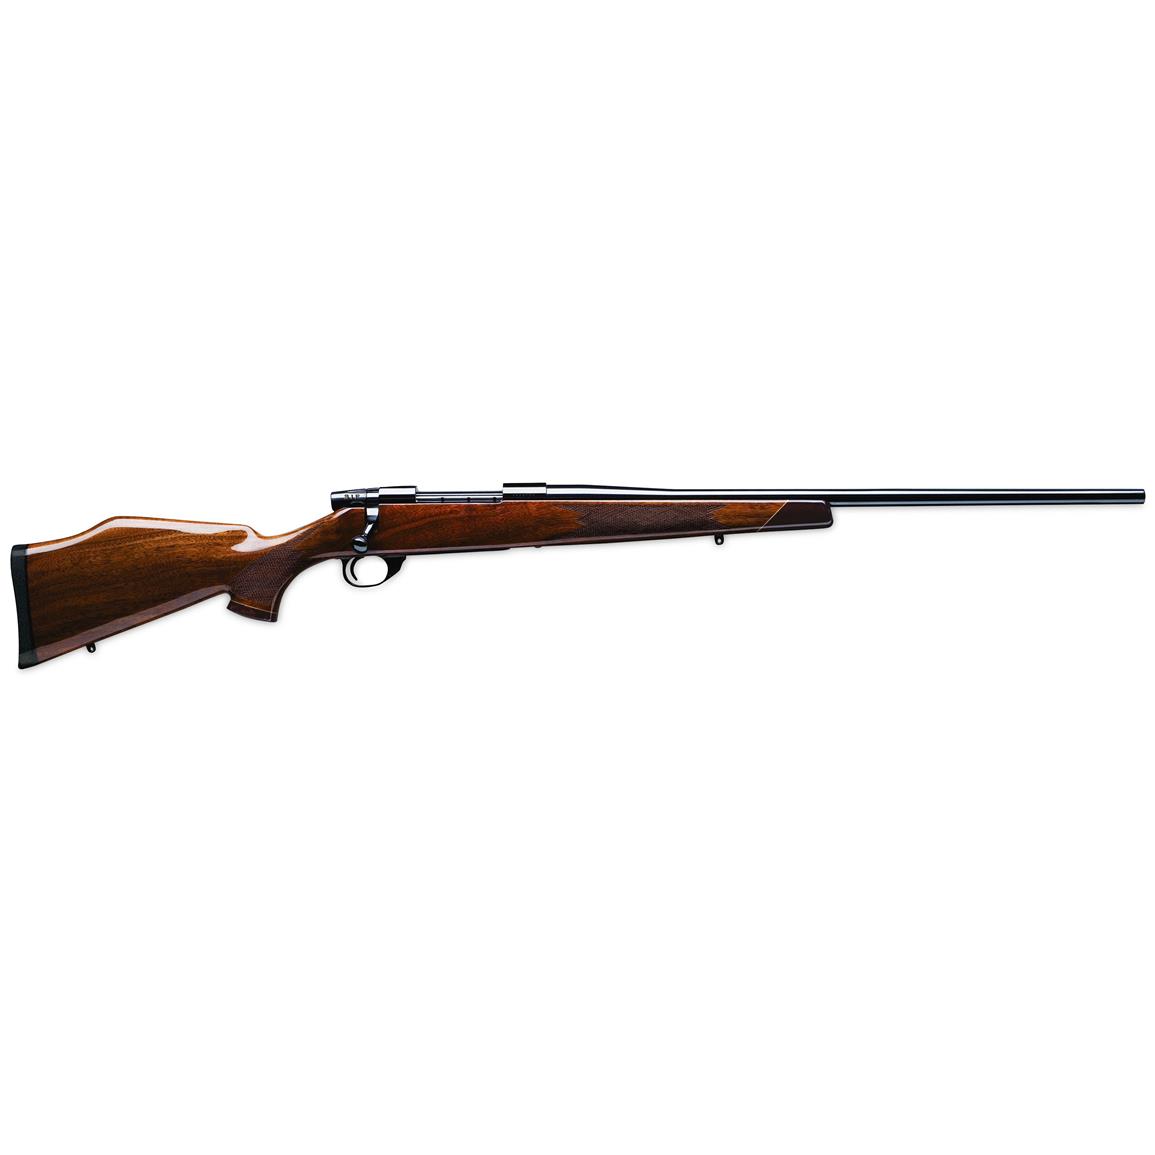 Weatherby Vanguard 2 Deluxe, Bolt Action, .30-06 Springfield, 24" Barrel, 5+1 Rounds